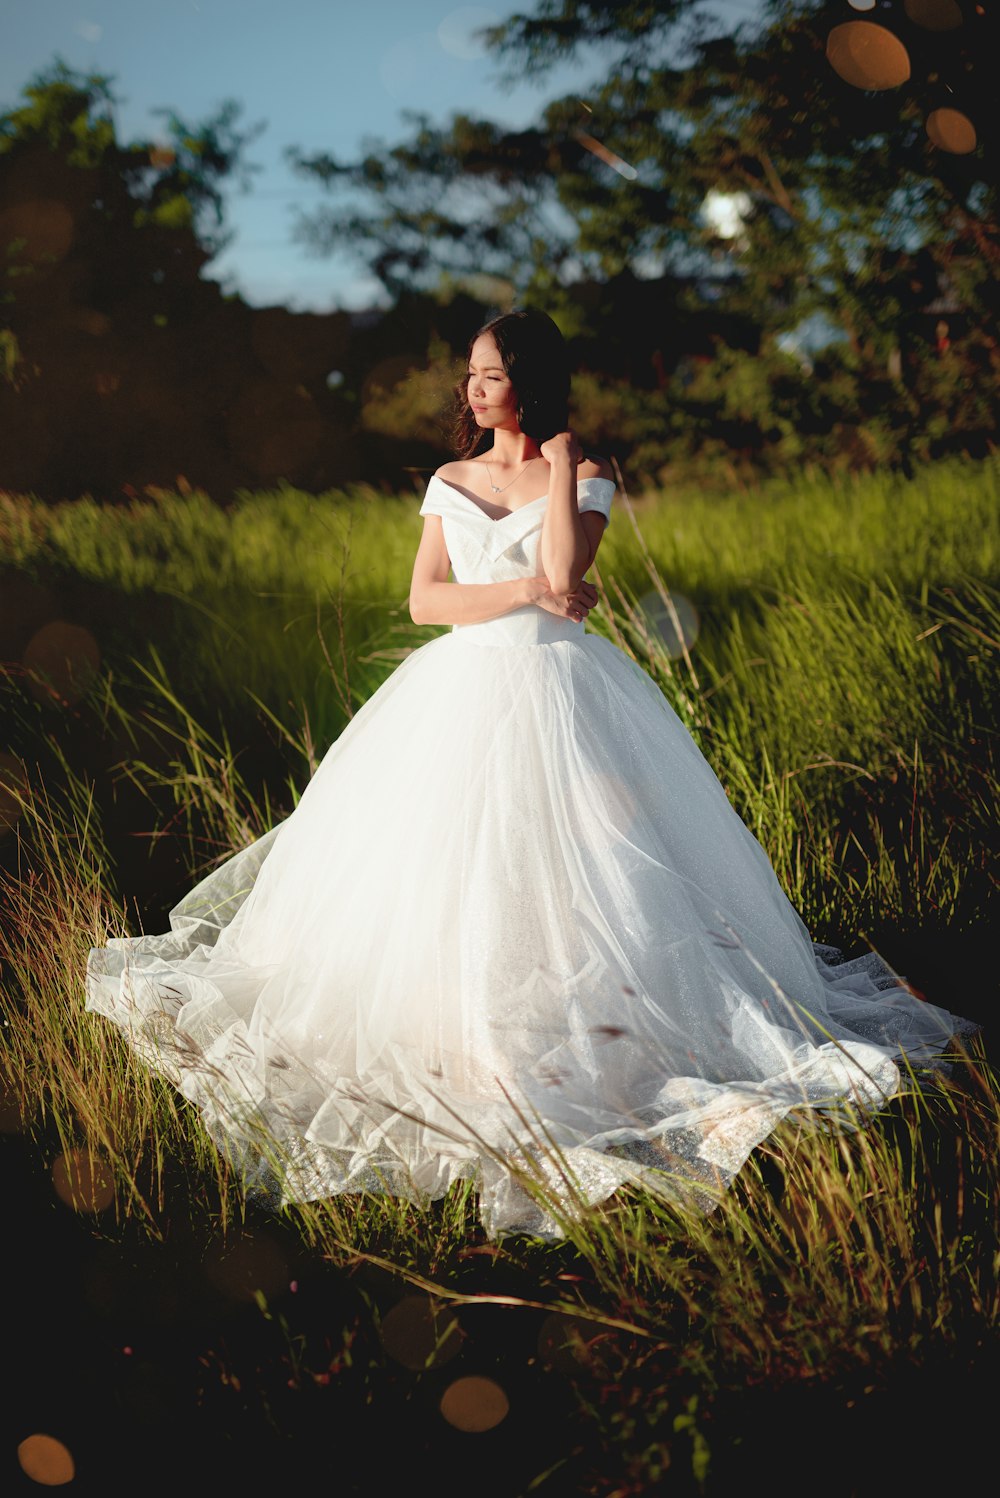 woman in white dress standing on green grass field during daytime